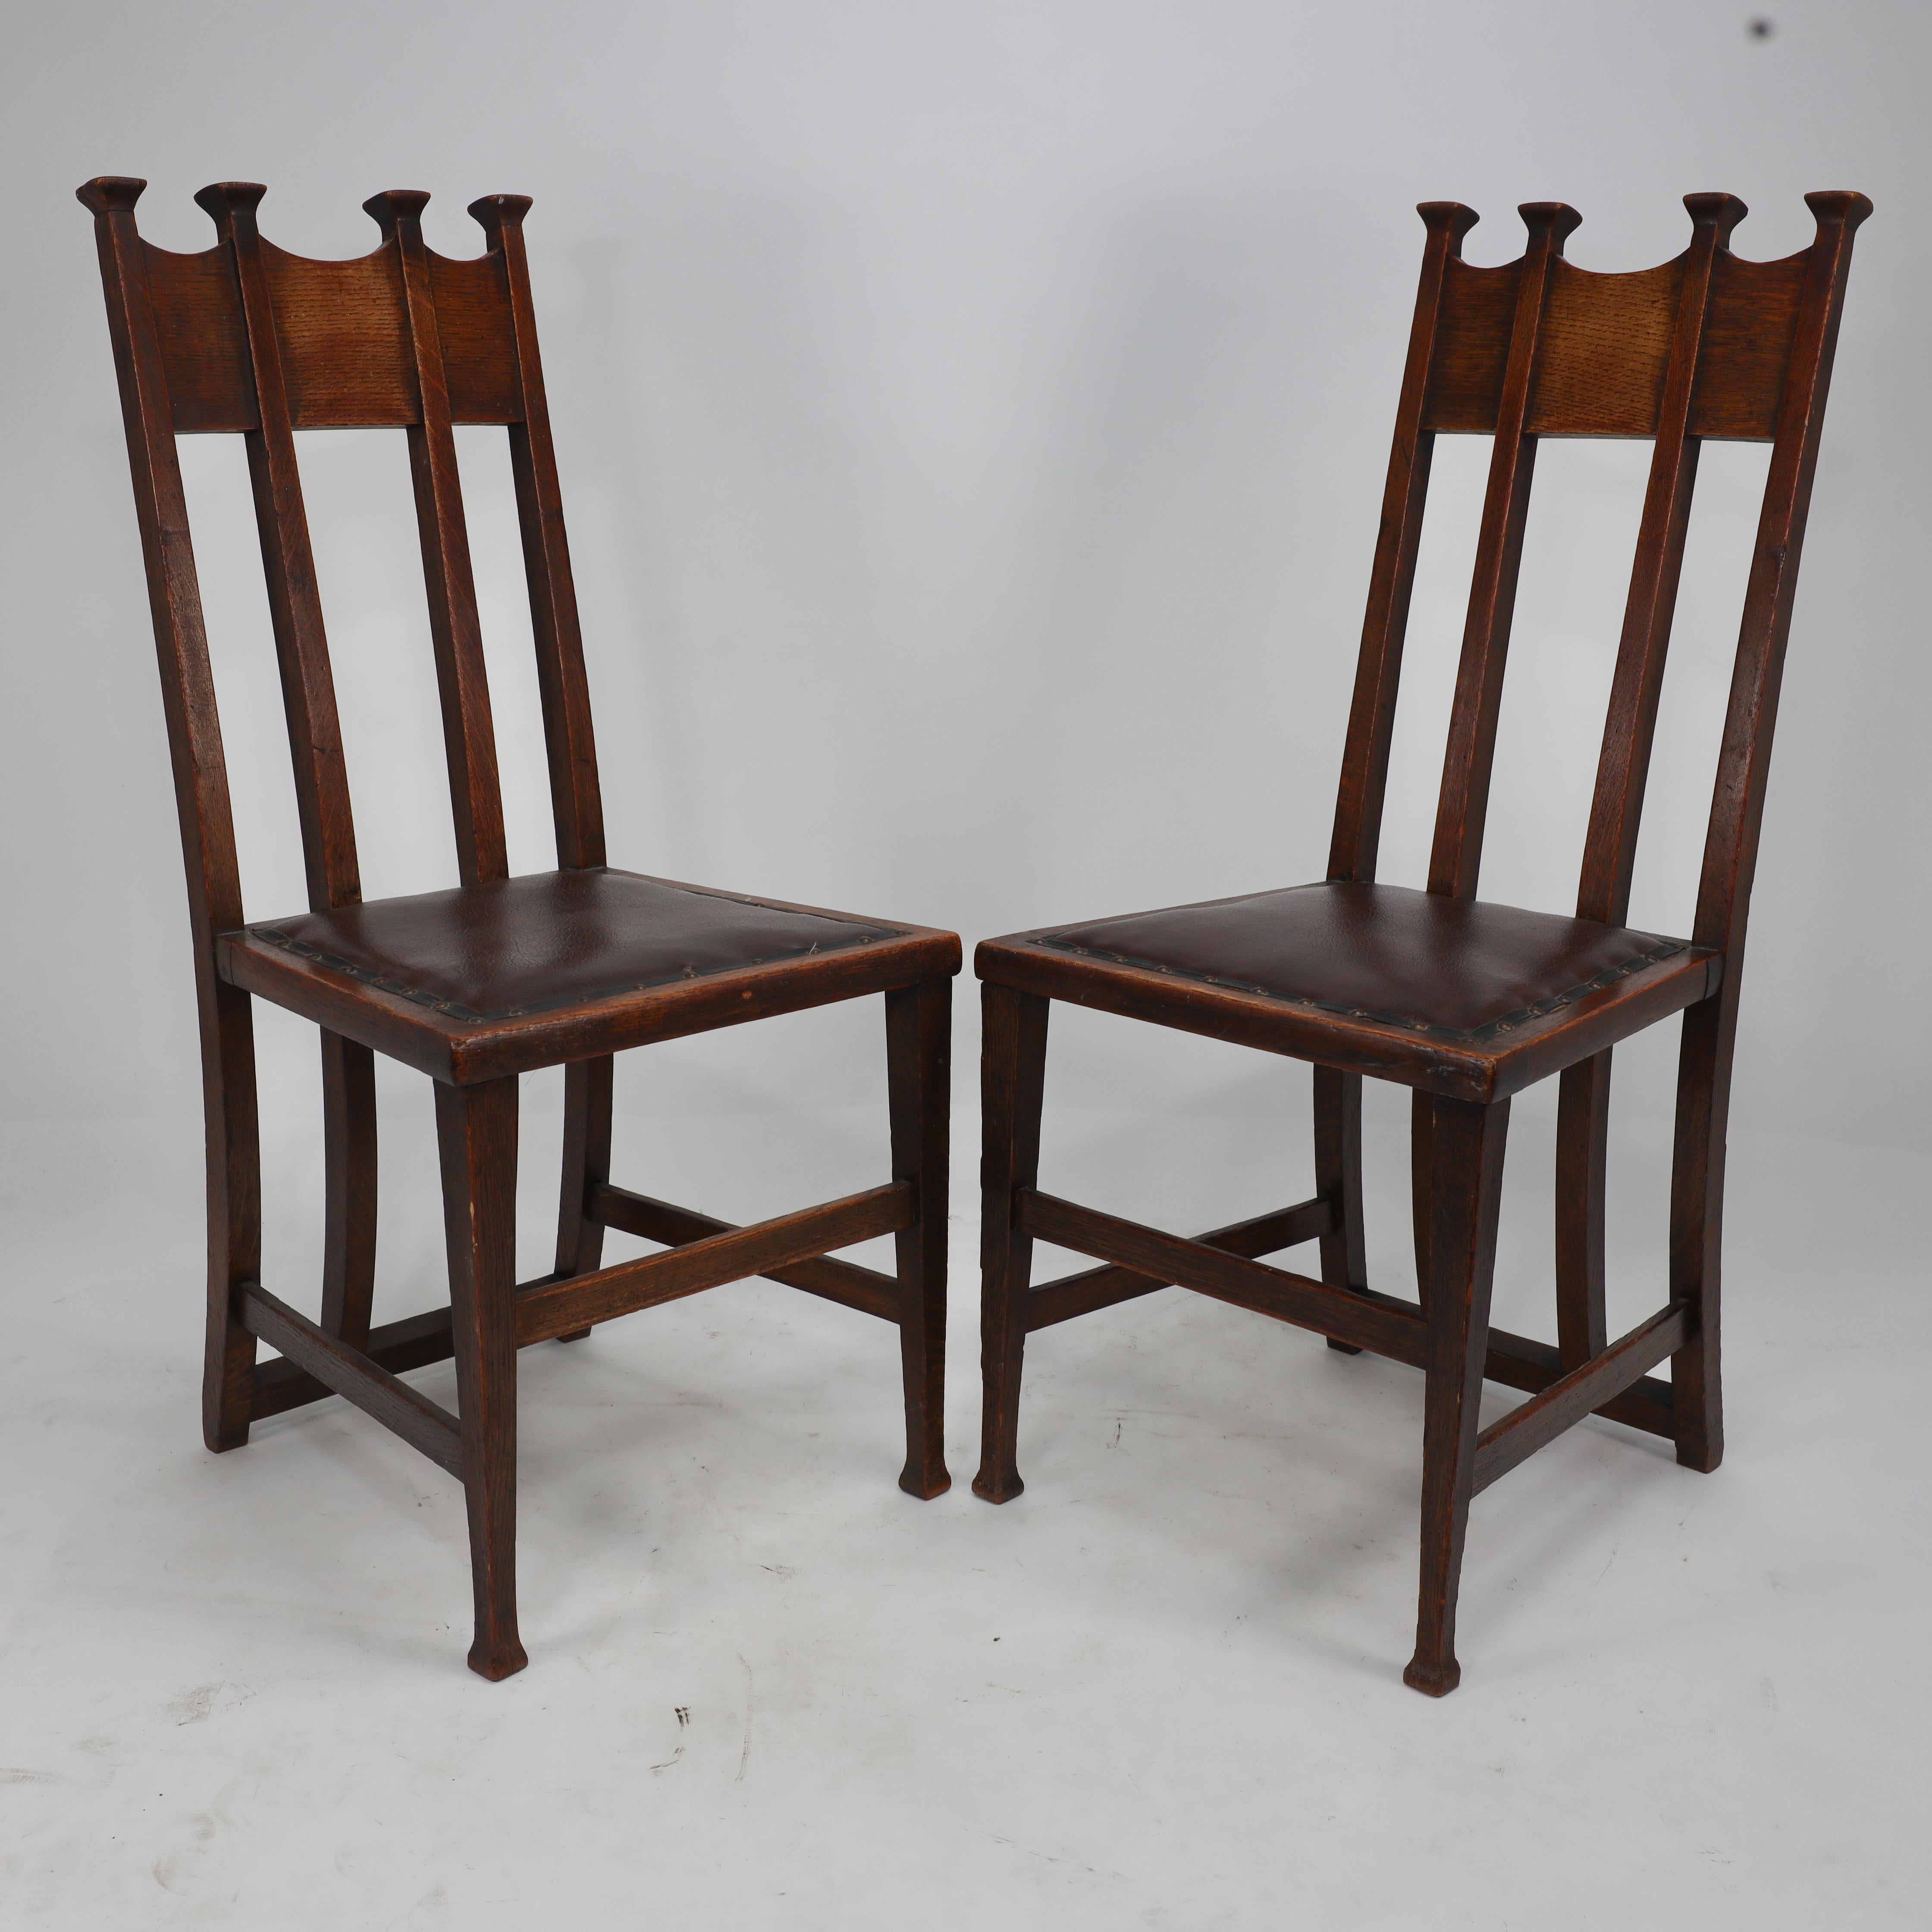 George Montague Ellwood. Made by J S Henry. A rare set of ten oak dining chairs. For Sale 4